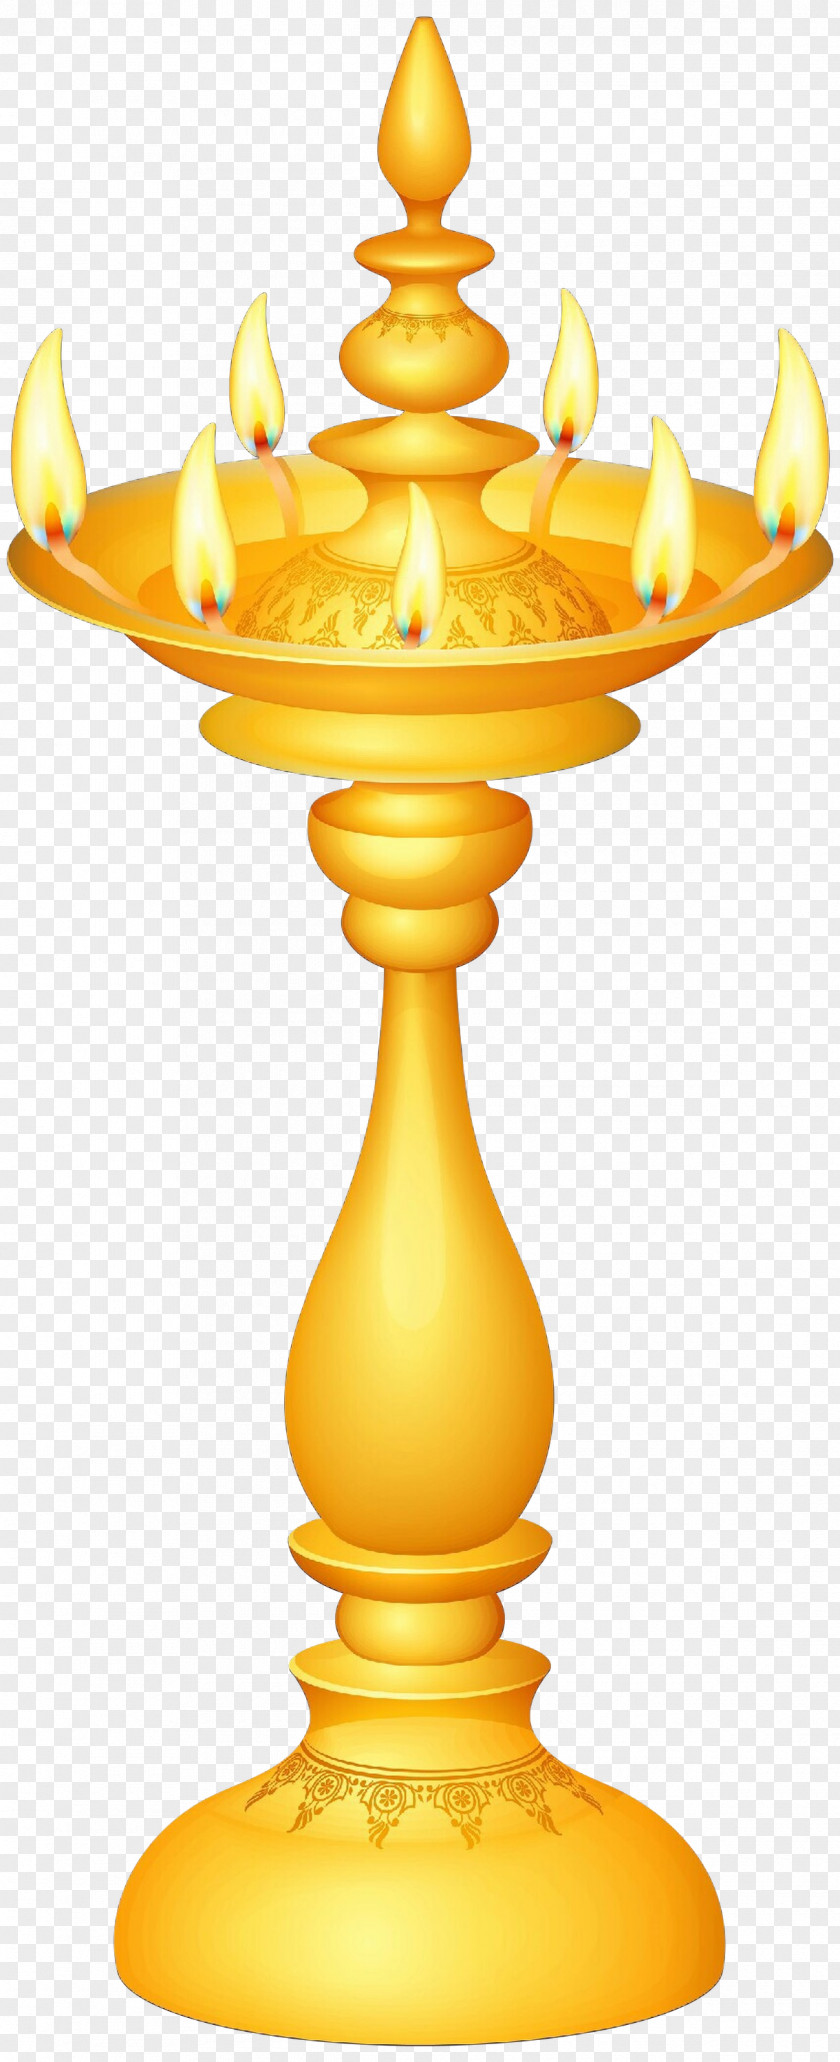 Tableware Light Fixture Yellow Clip Art Candle Holder Oil Lamp PNG